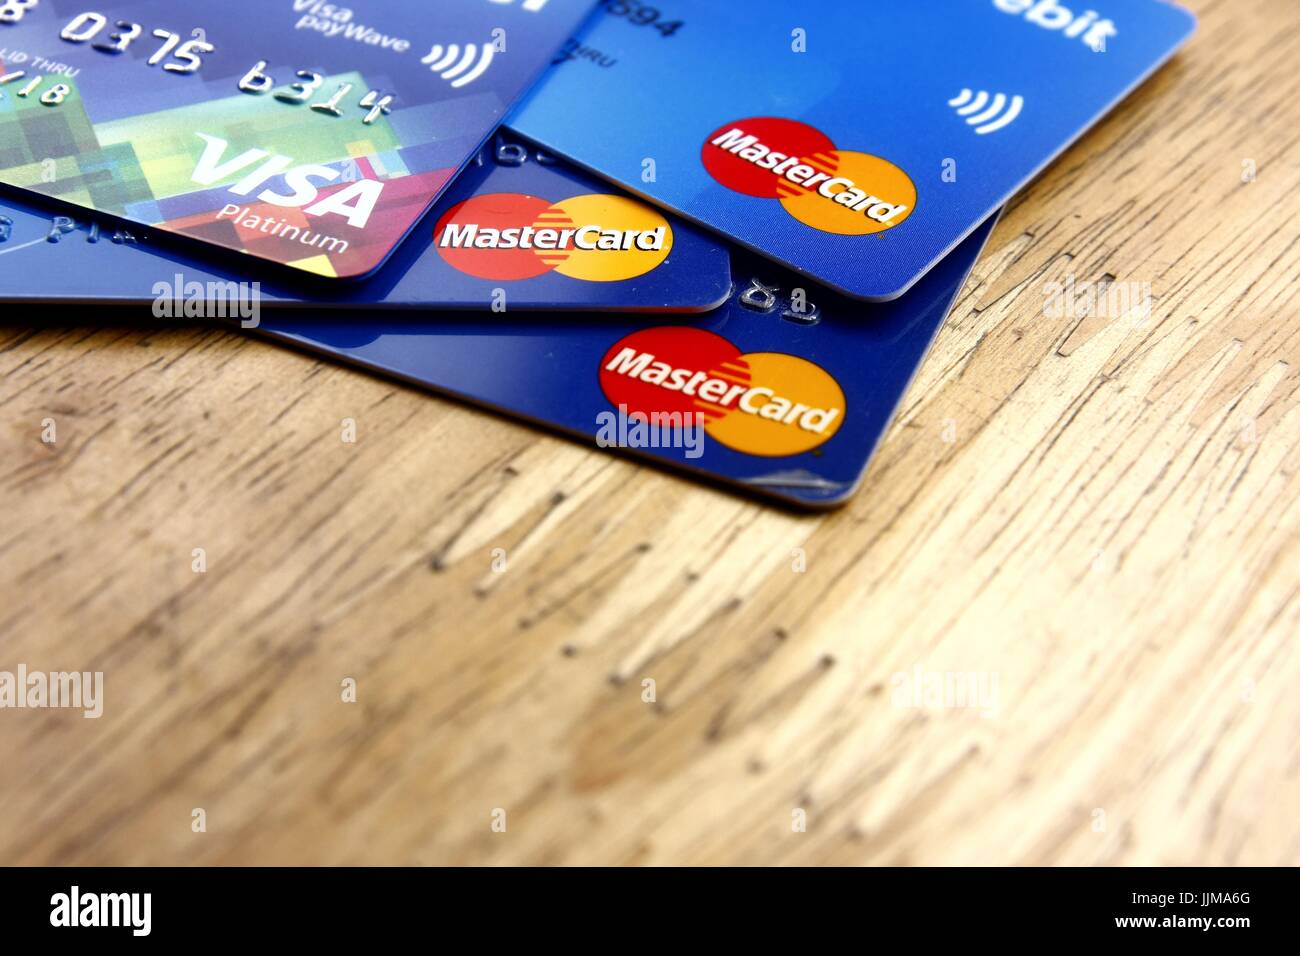 ANTIPOLO CITY, PHILIPPINES - JULY 17, 2017: A bunch of Mastercard and Visa credit cards spread on a wooden table Stock Photo